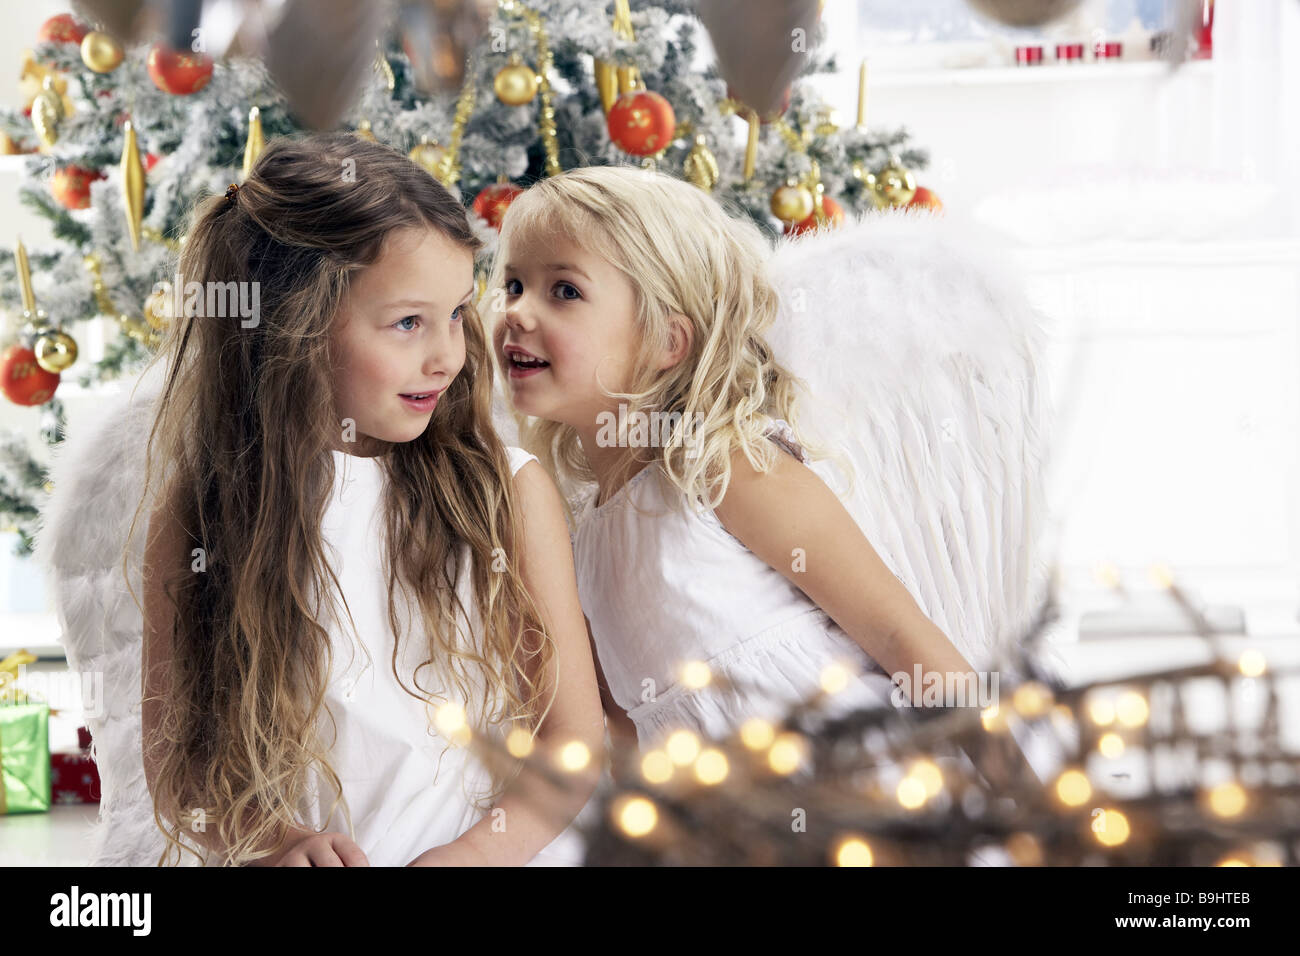 Christmas Living room children girl angel wings outfit Christmas-angels whispers semi-portrait people sisters siblings friends Stock Photo